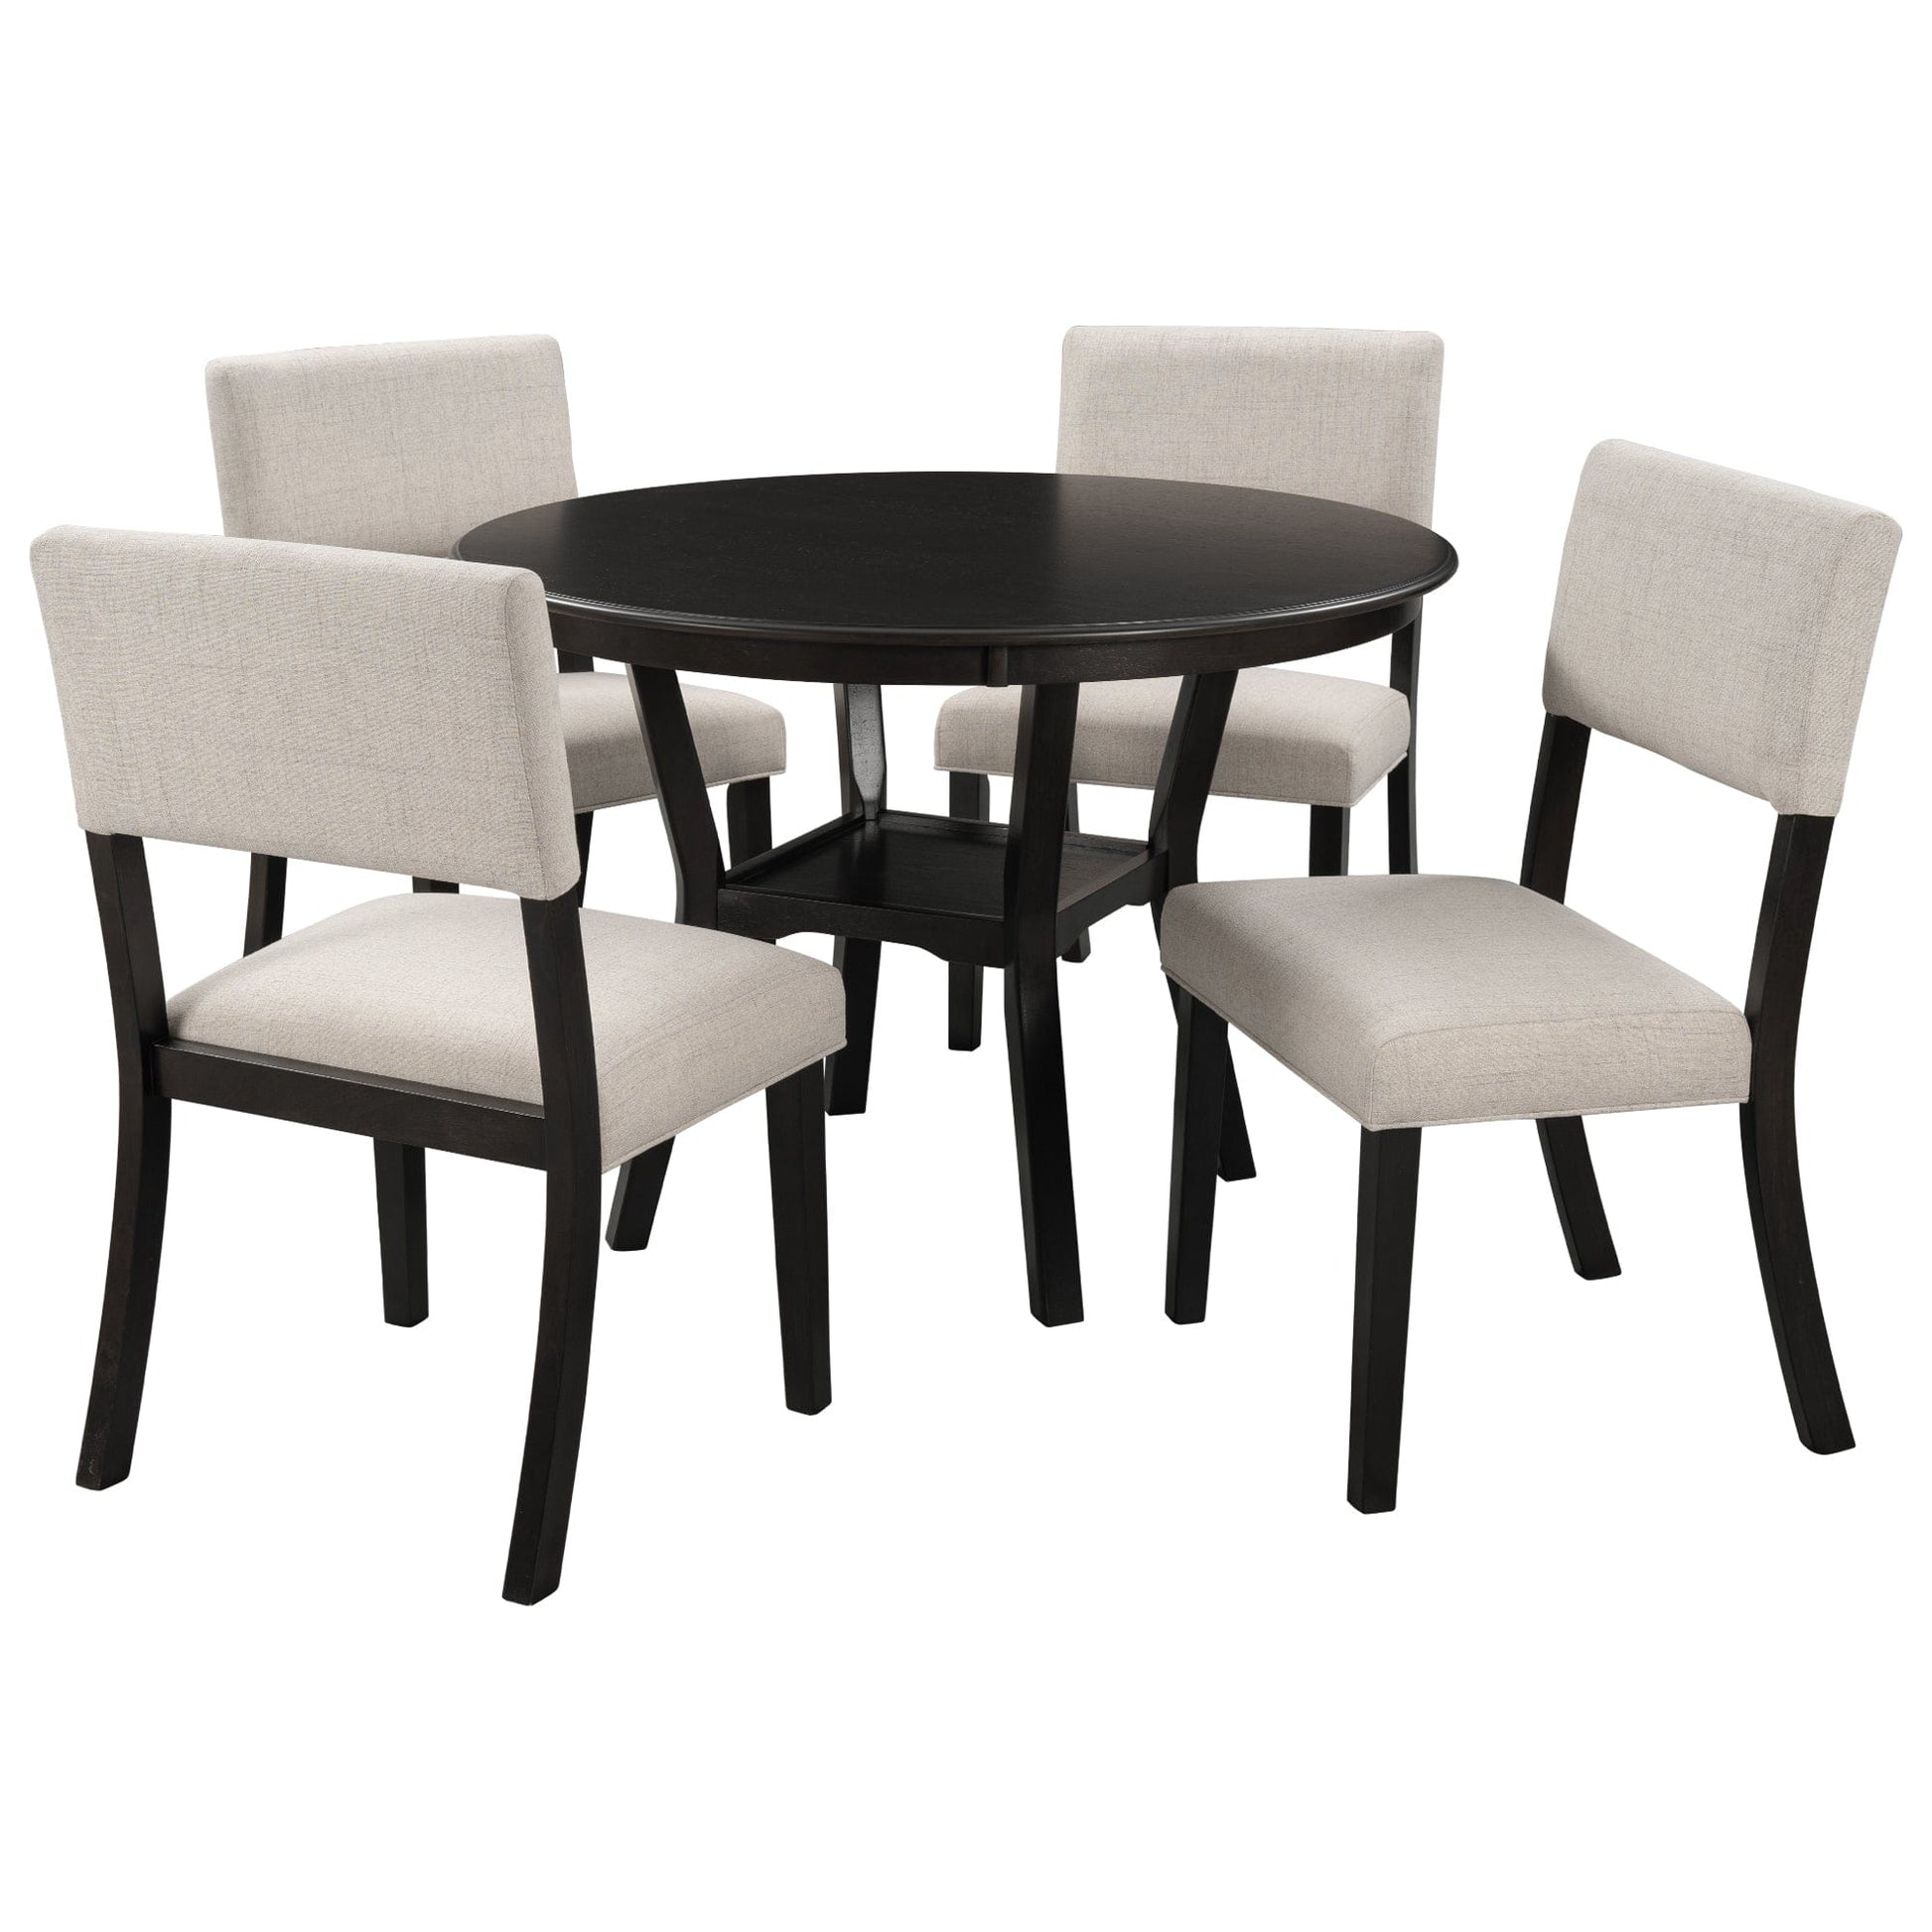 1st Choice Furniture Direct Dining Set 1st Choice 5-Piece  Espresso Dining Set with Round Table and 4 Chairs